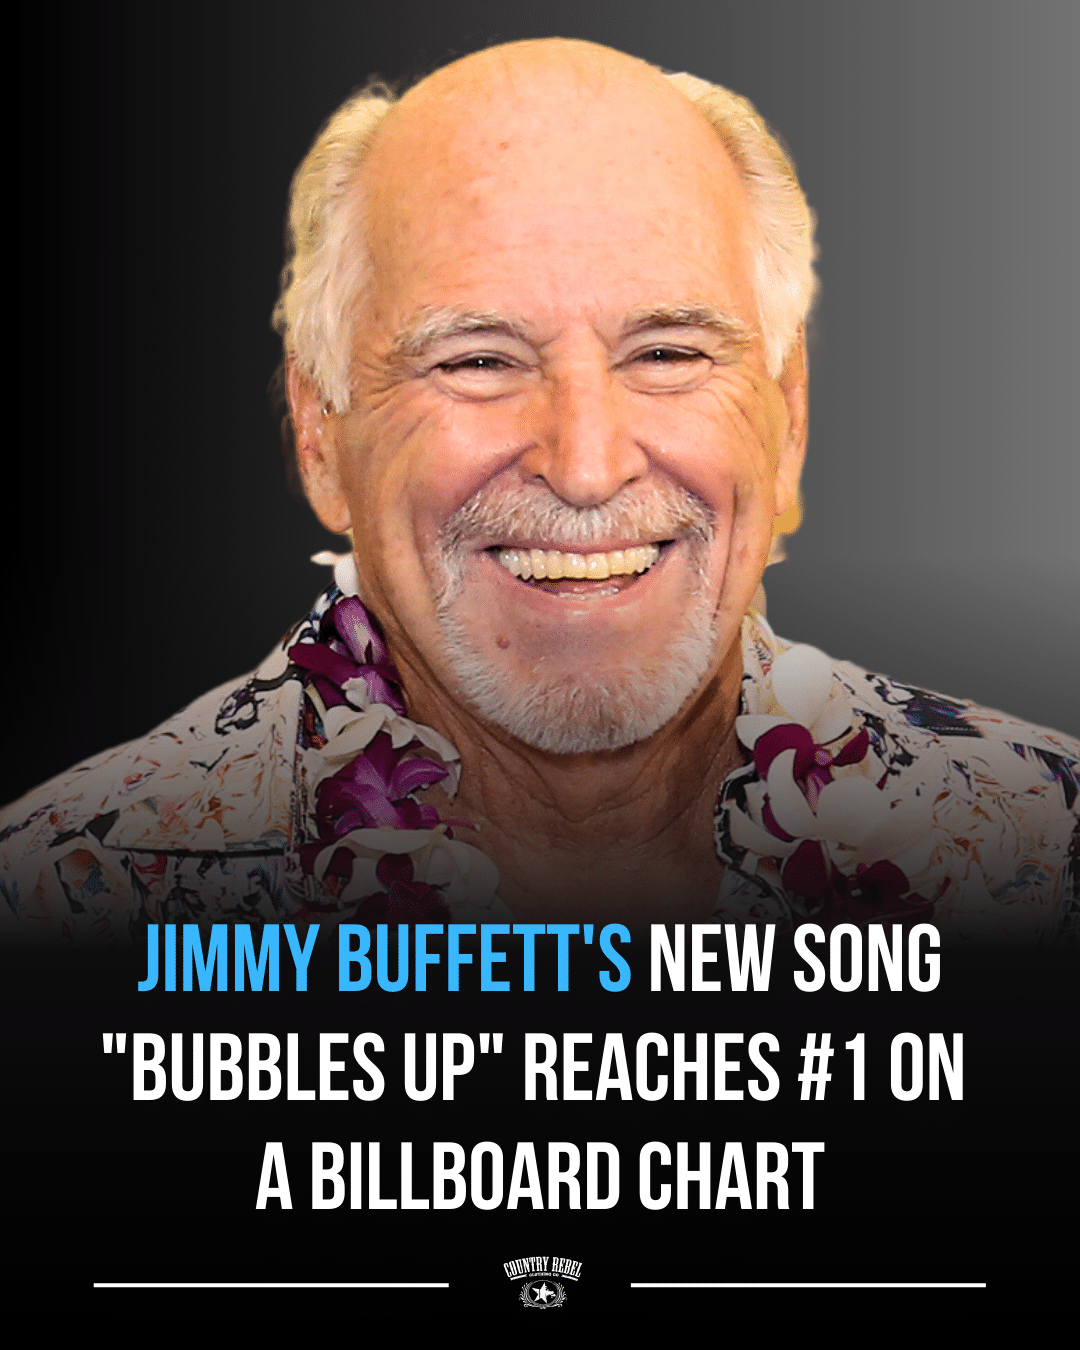 Jimmy Buffett reaches #1 with "Bubbles Up"